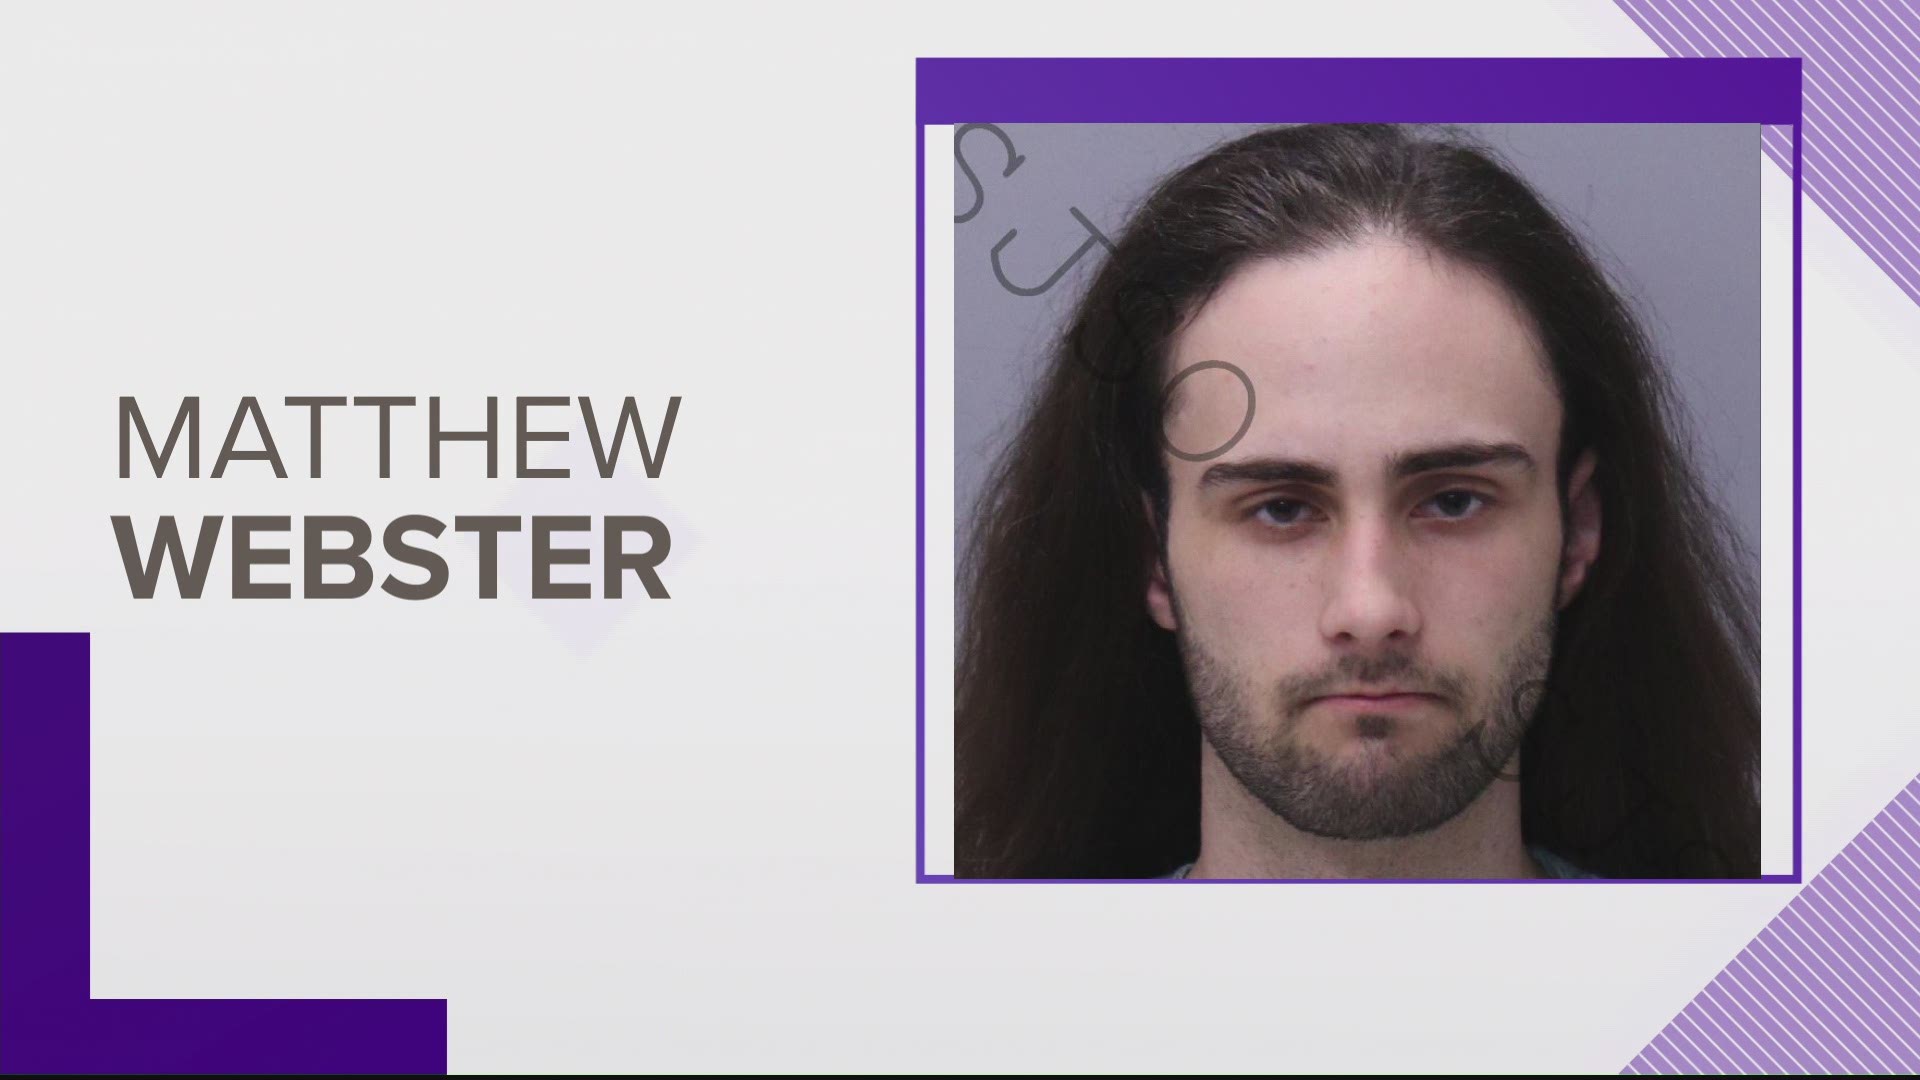 Matthew Webster was initially arrested on March 30.